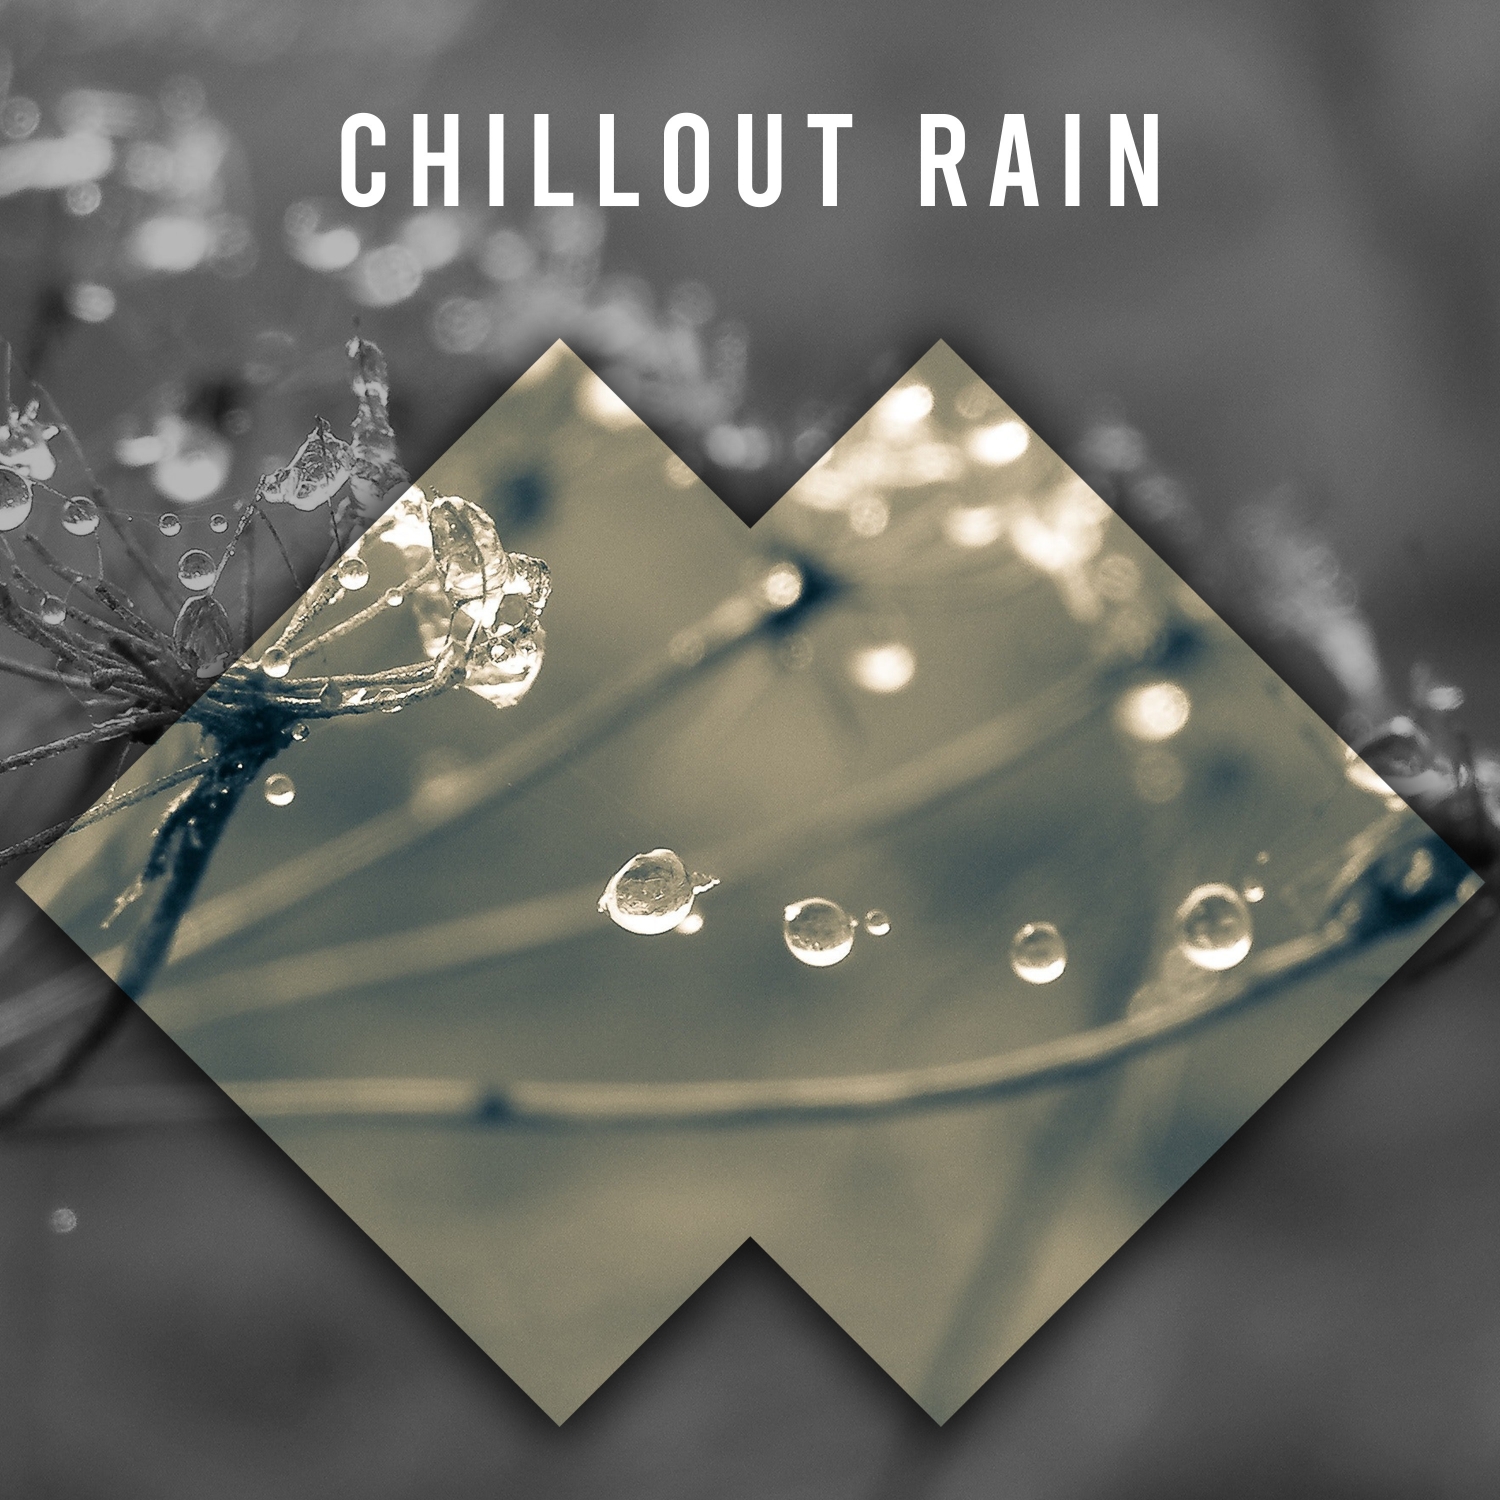 #20 Chillout Rain Album for Spa Relaxation